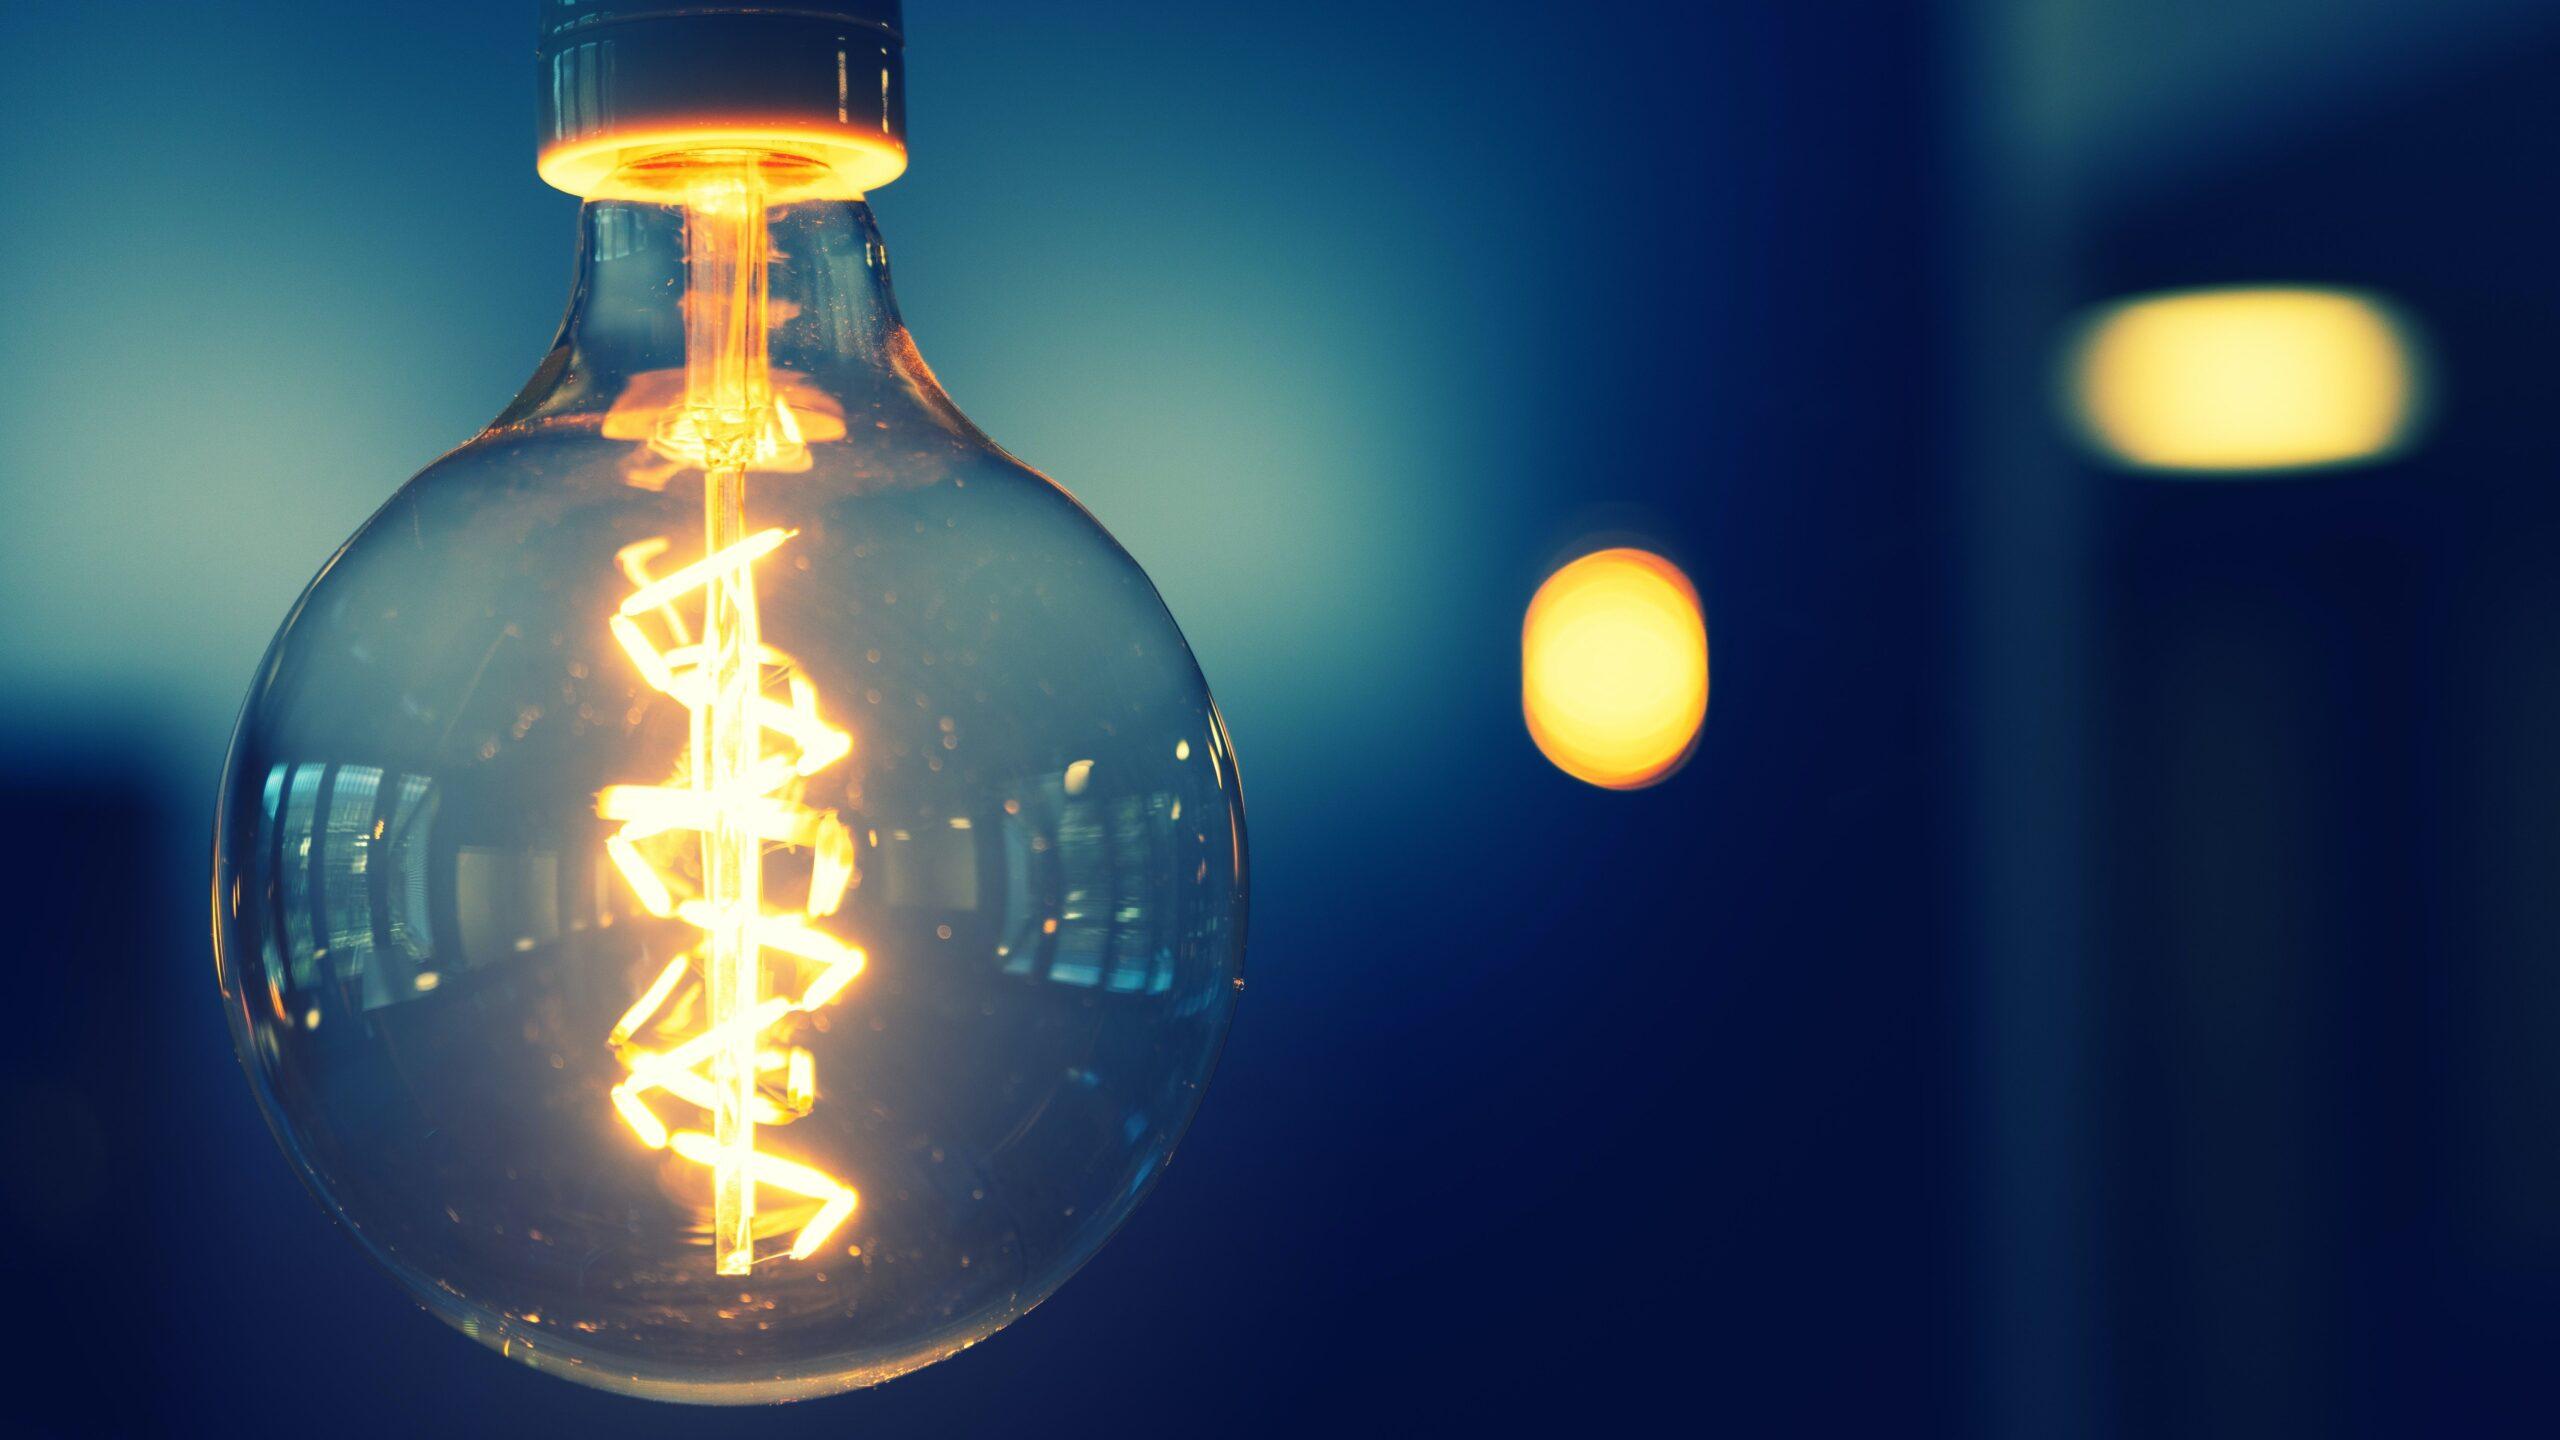 A working light bulb shining against a blurred background.